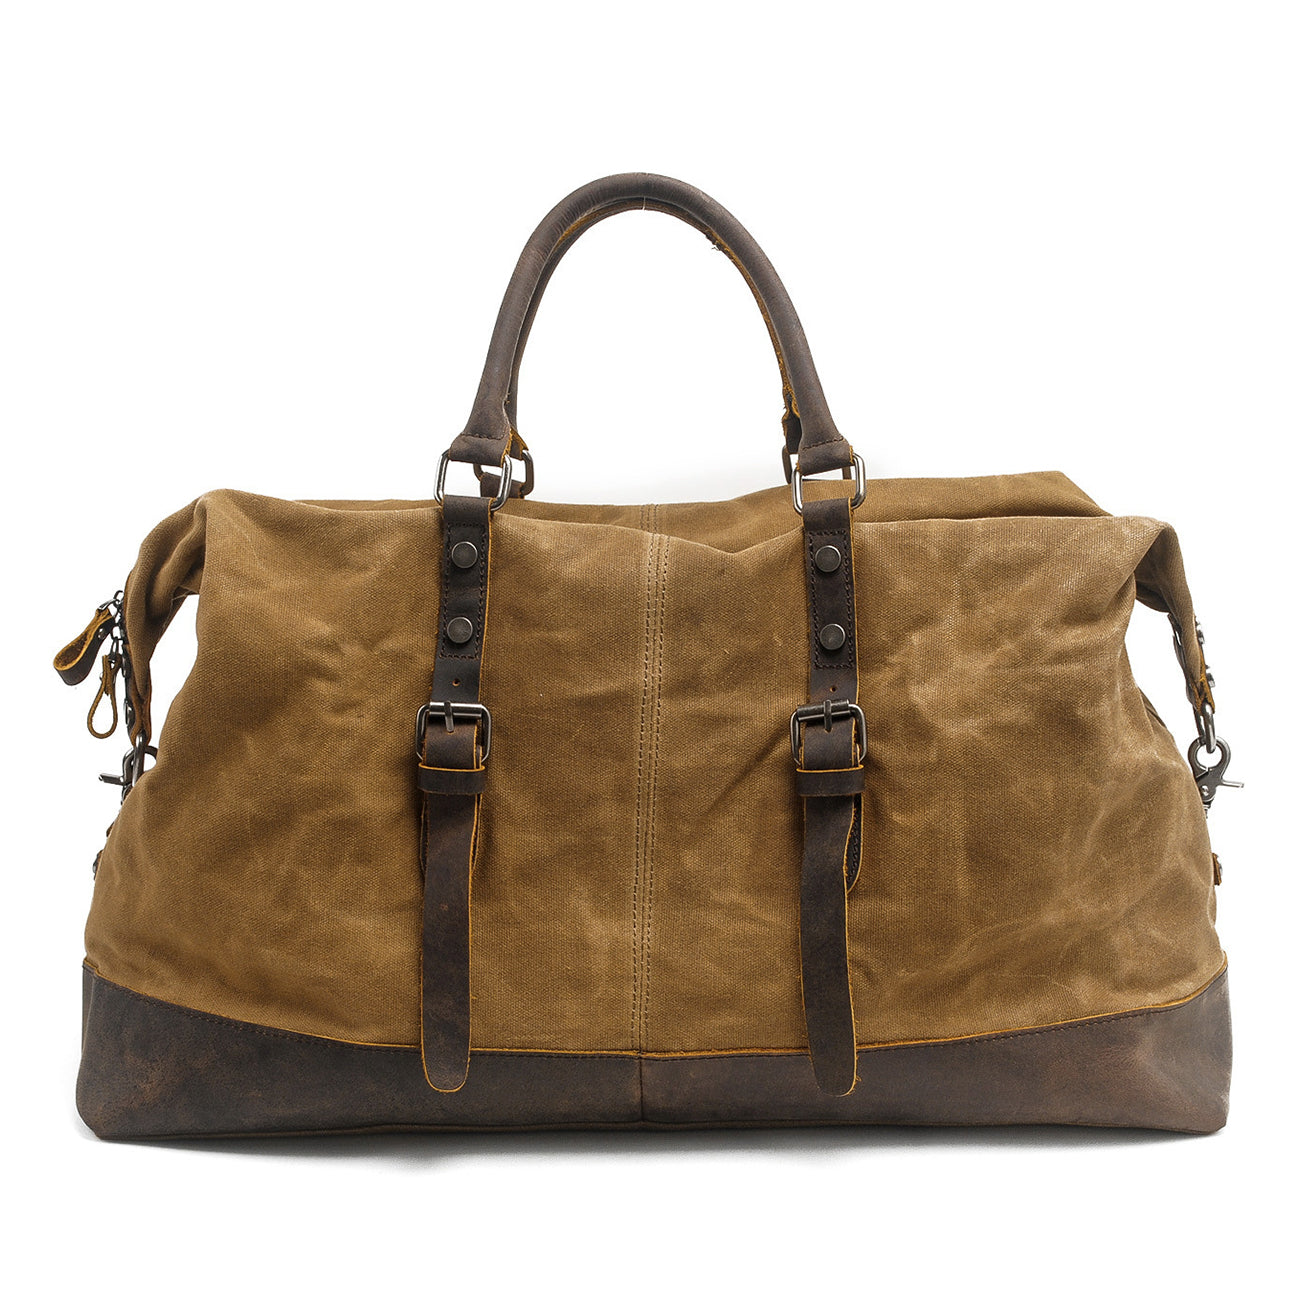 easily packable canvas duffle bag mens to go on weekend trips